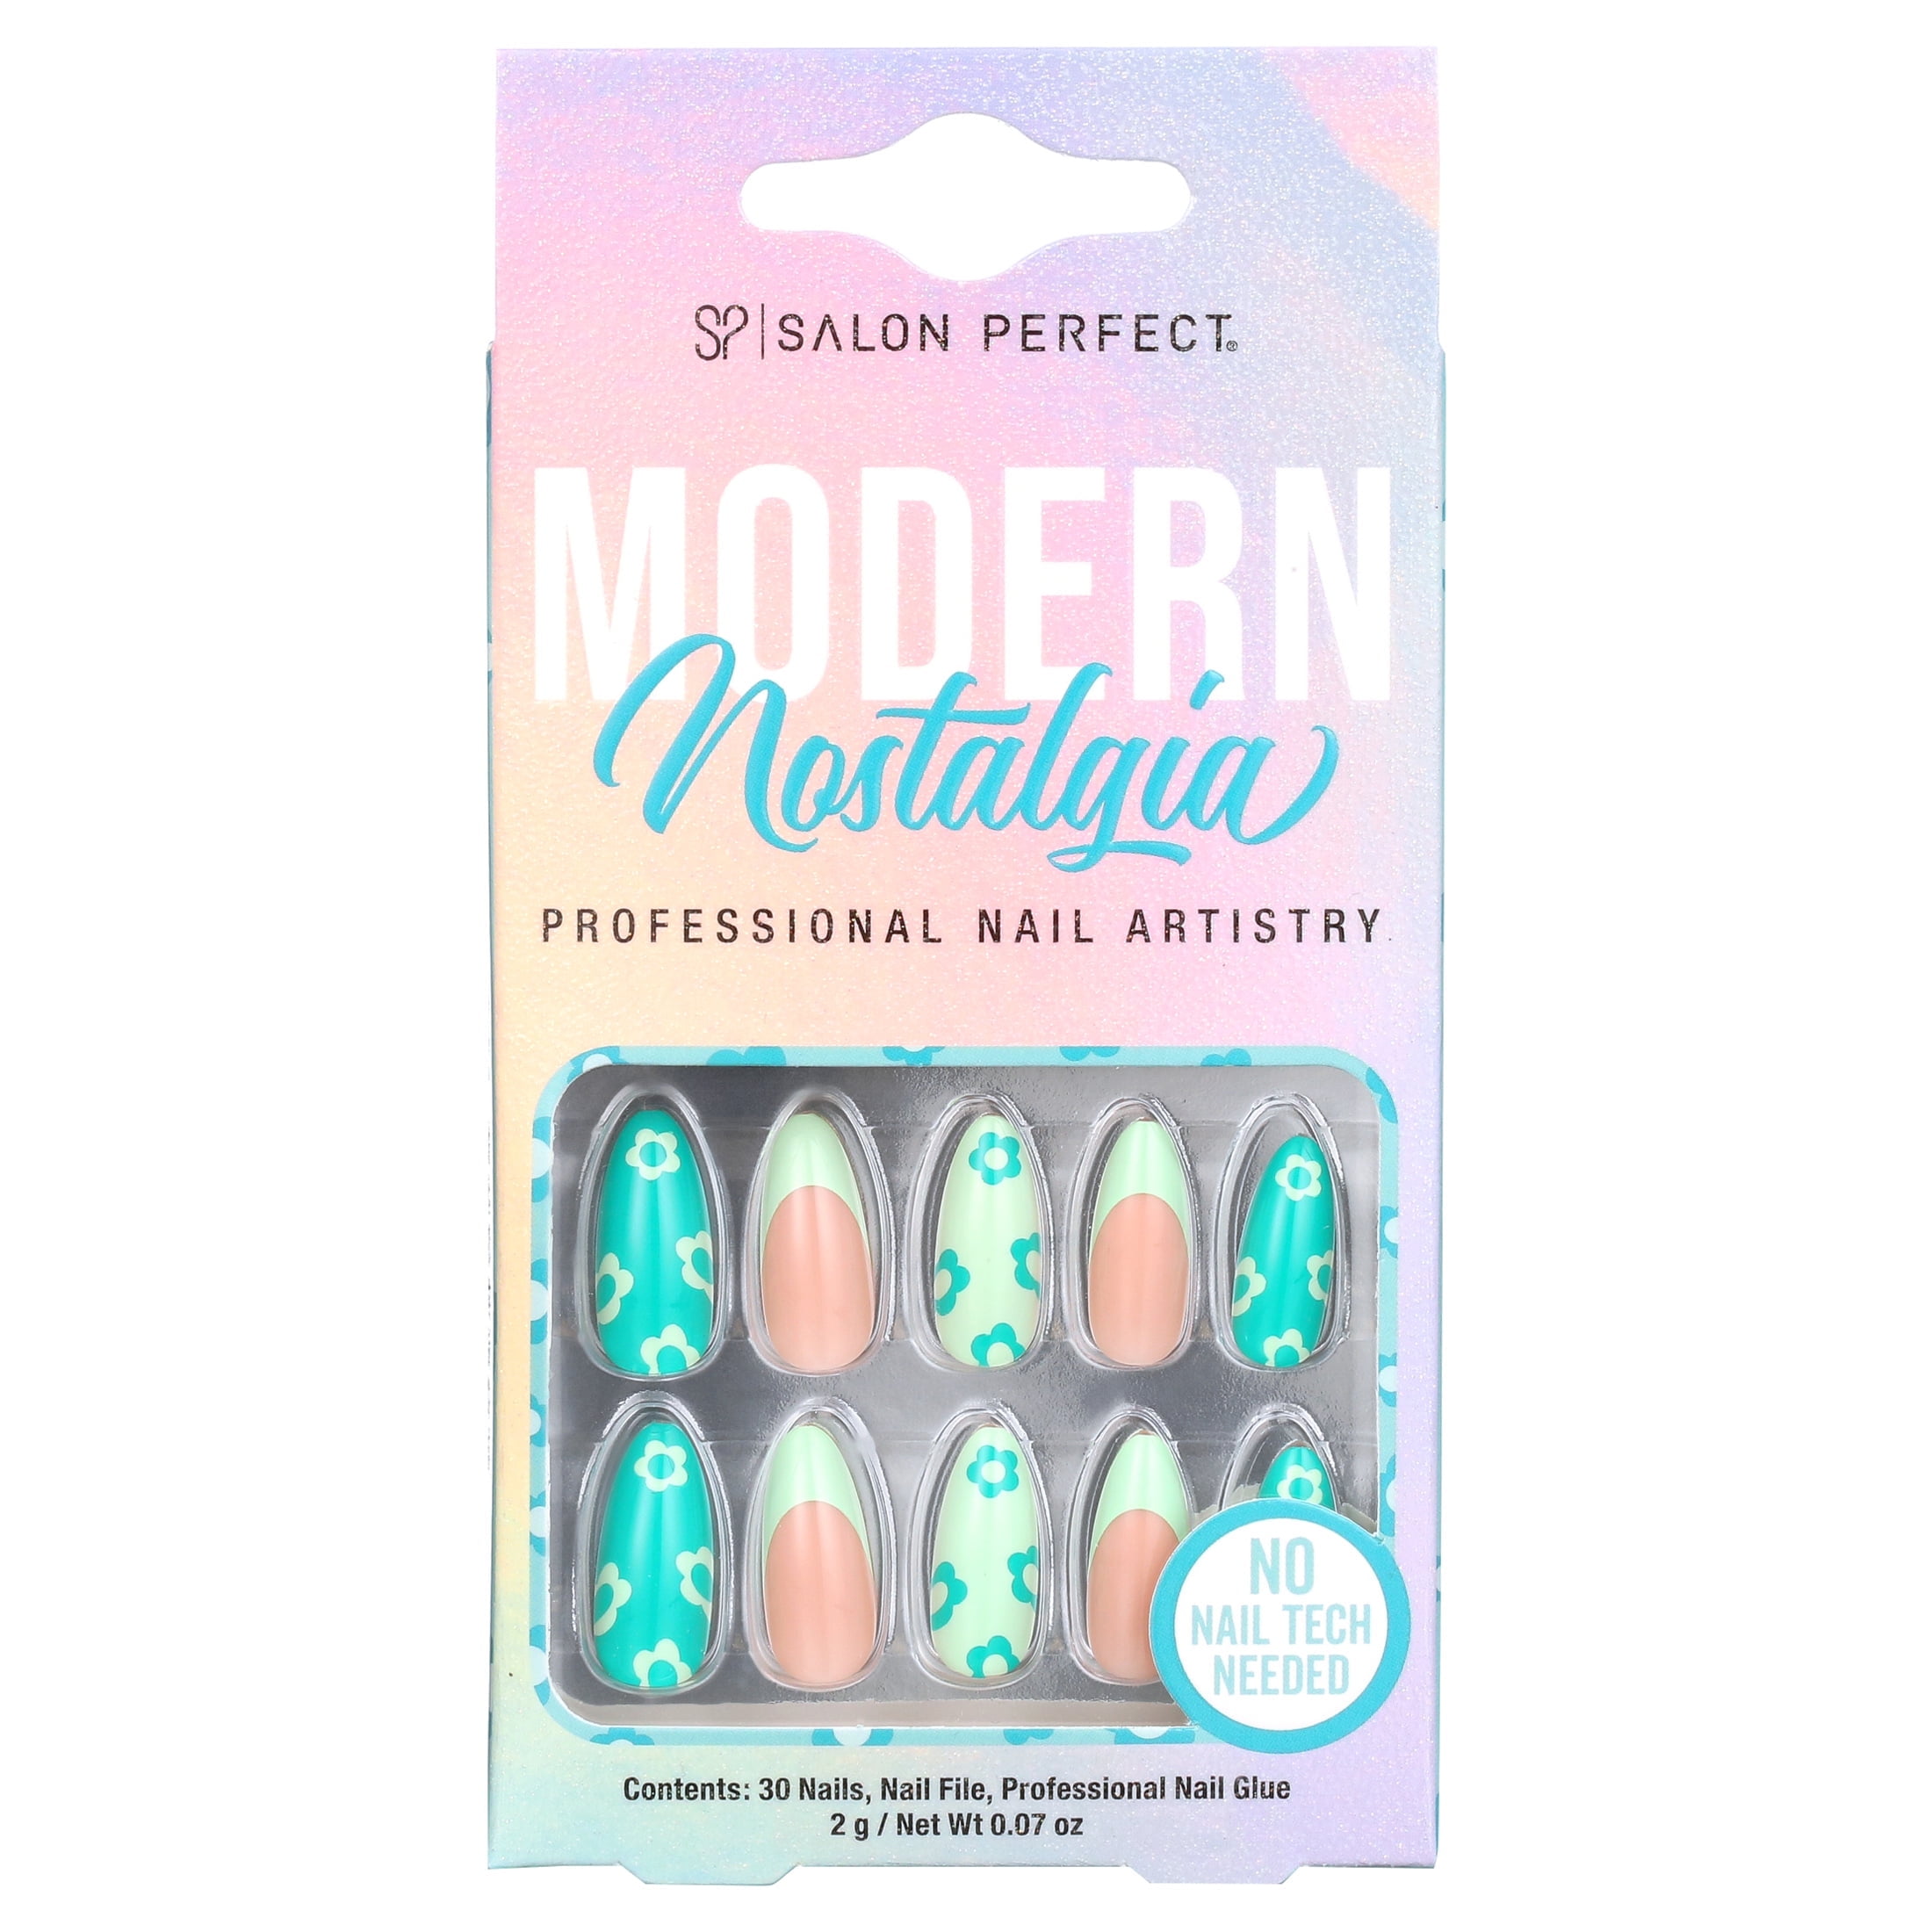 Press-On Nails for sale in Fresno, California | Facebook Marketplace |  Facebook